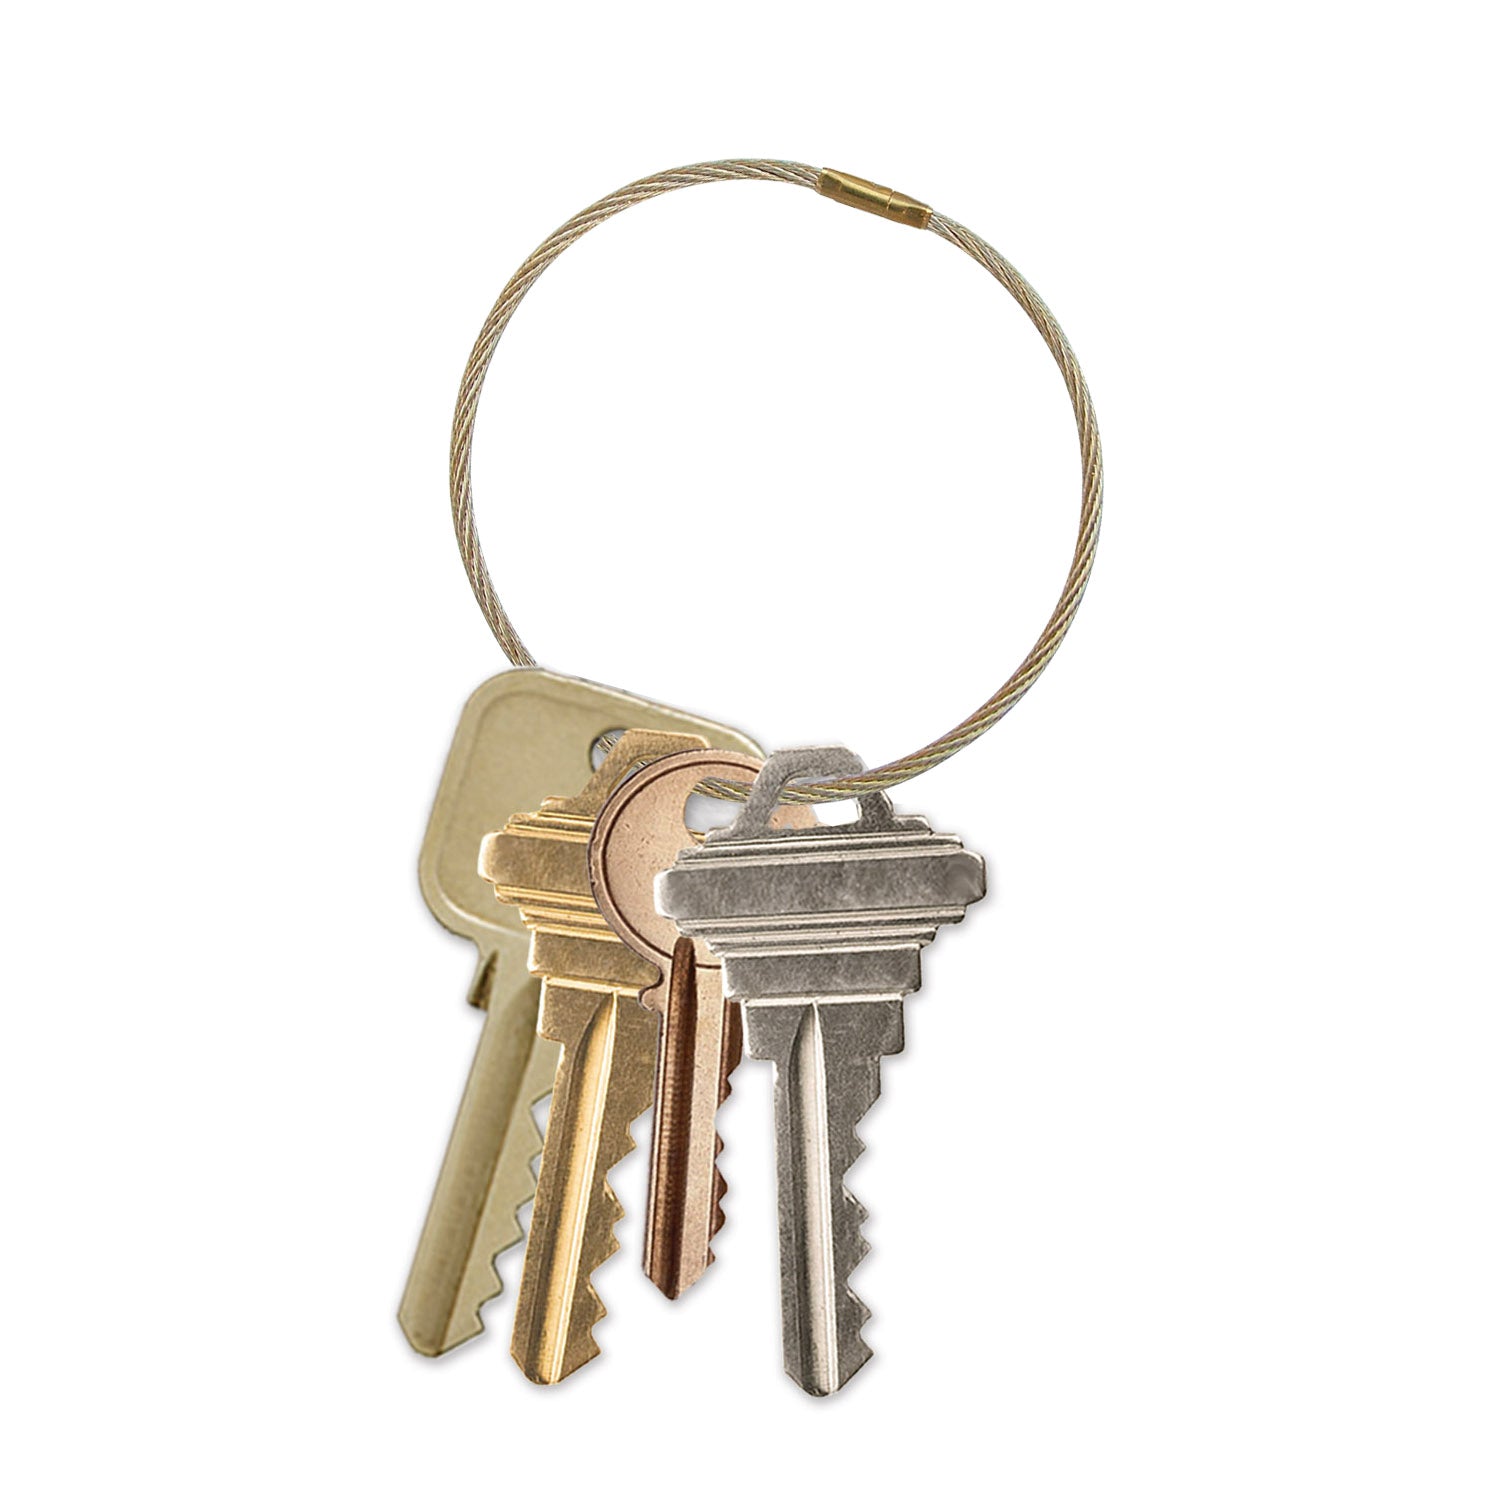 20 pcs - 1 1/8 Inch Silver - Heavy Duty Key Ring with Connector Chain